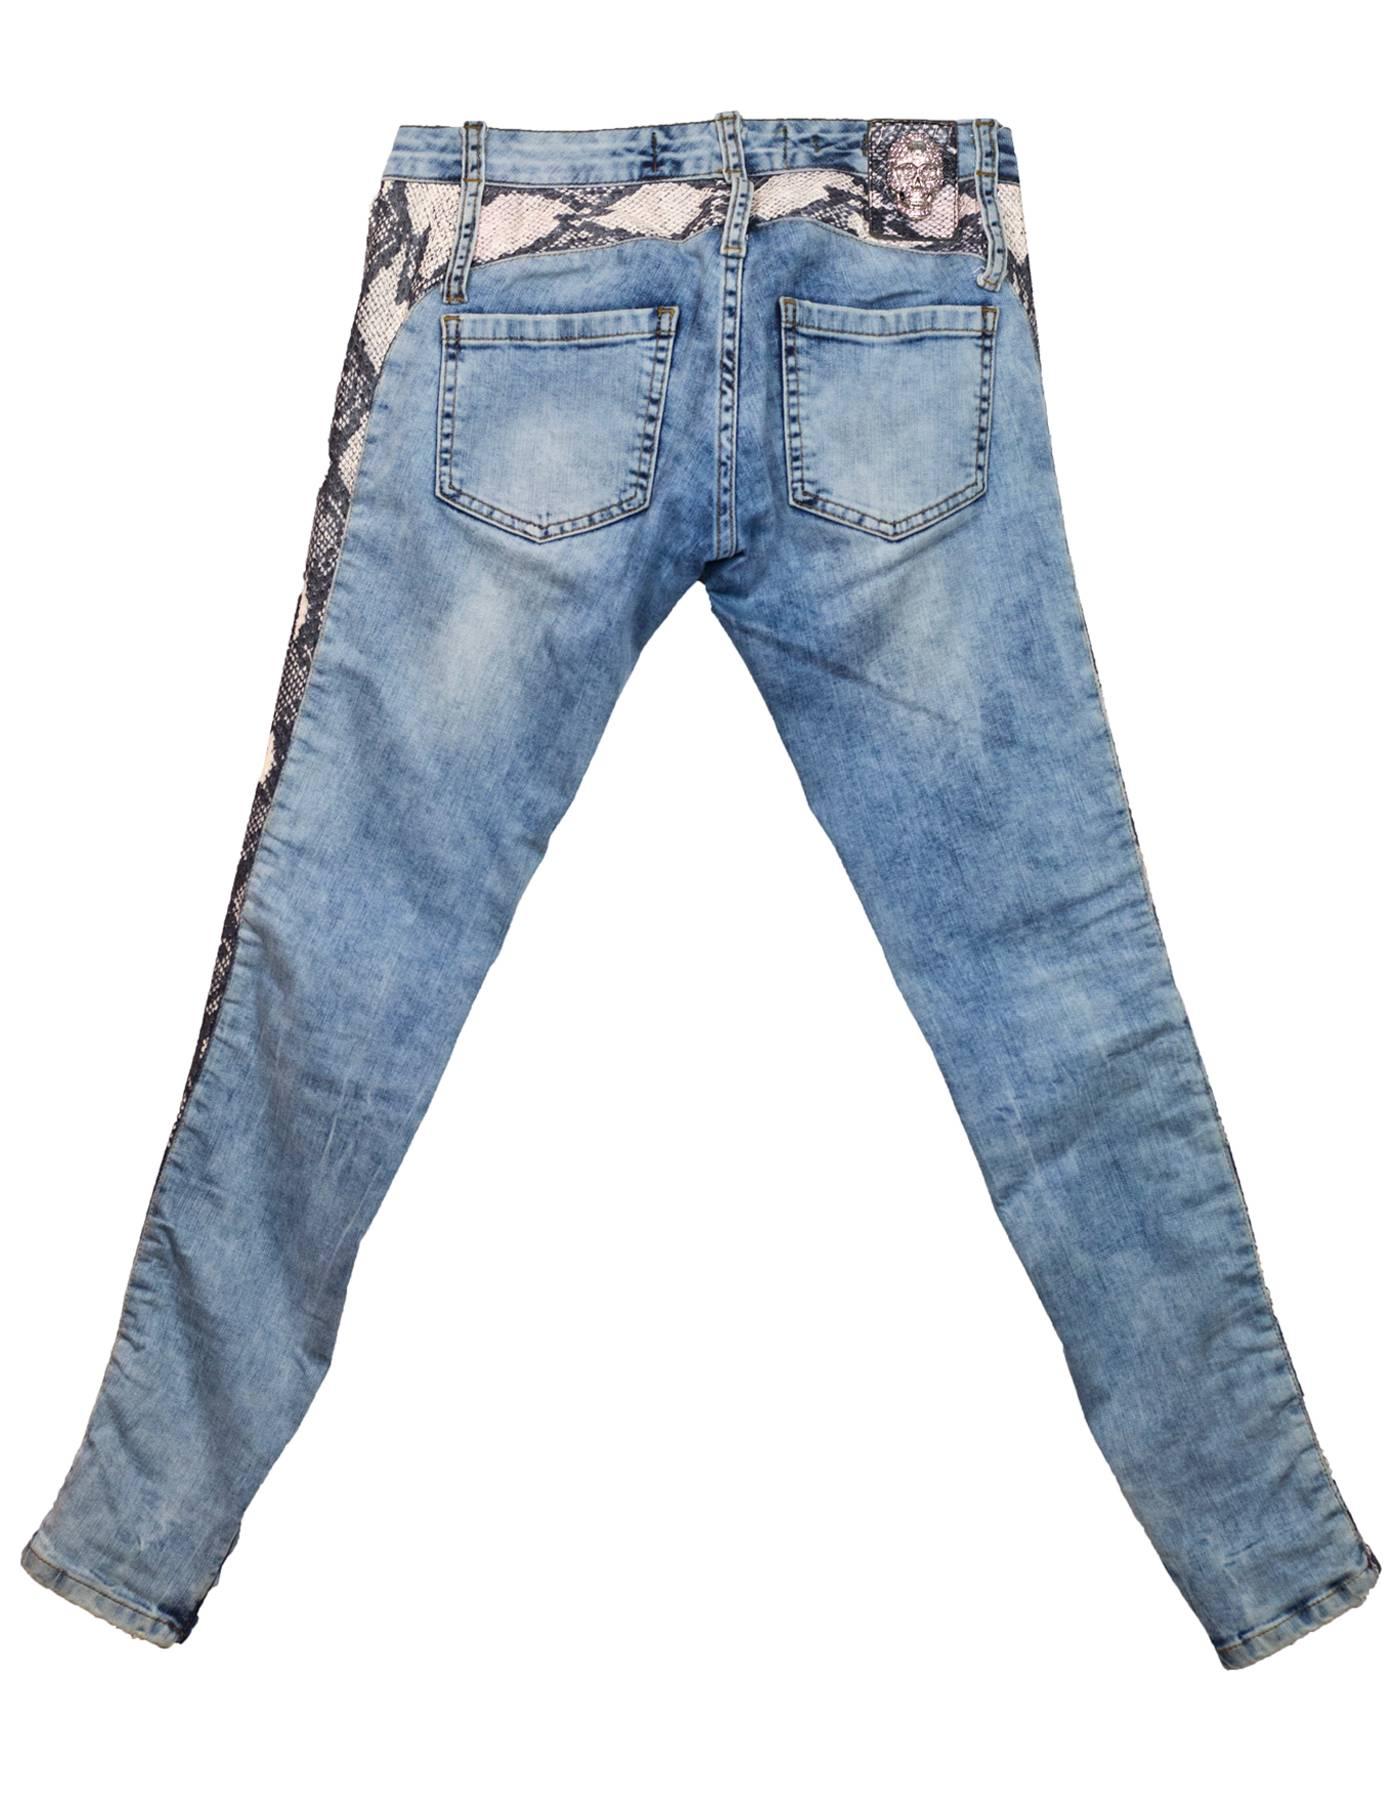 Philipp Plein Snakeskin Jeans Sz 25
Features pink snakeskin print down legs, zippers at ankles

Made In: Turkey
Color: Blue, pink
Closure/Opening: Zip and button closure
Composition: Cotton blend
Exterior Pockets: Hip pockets and coin